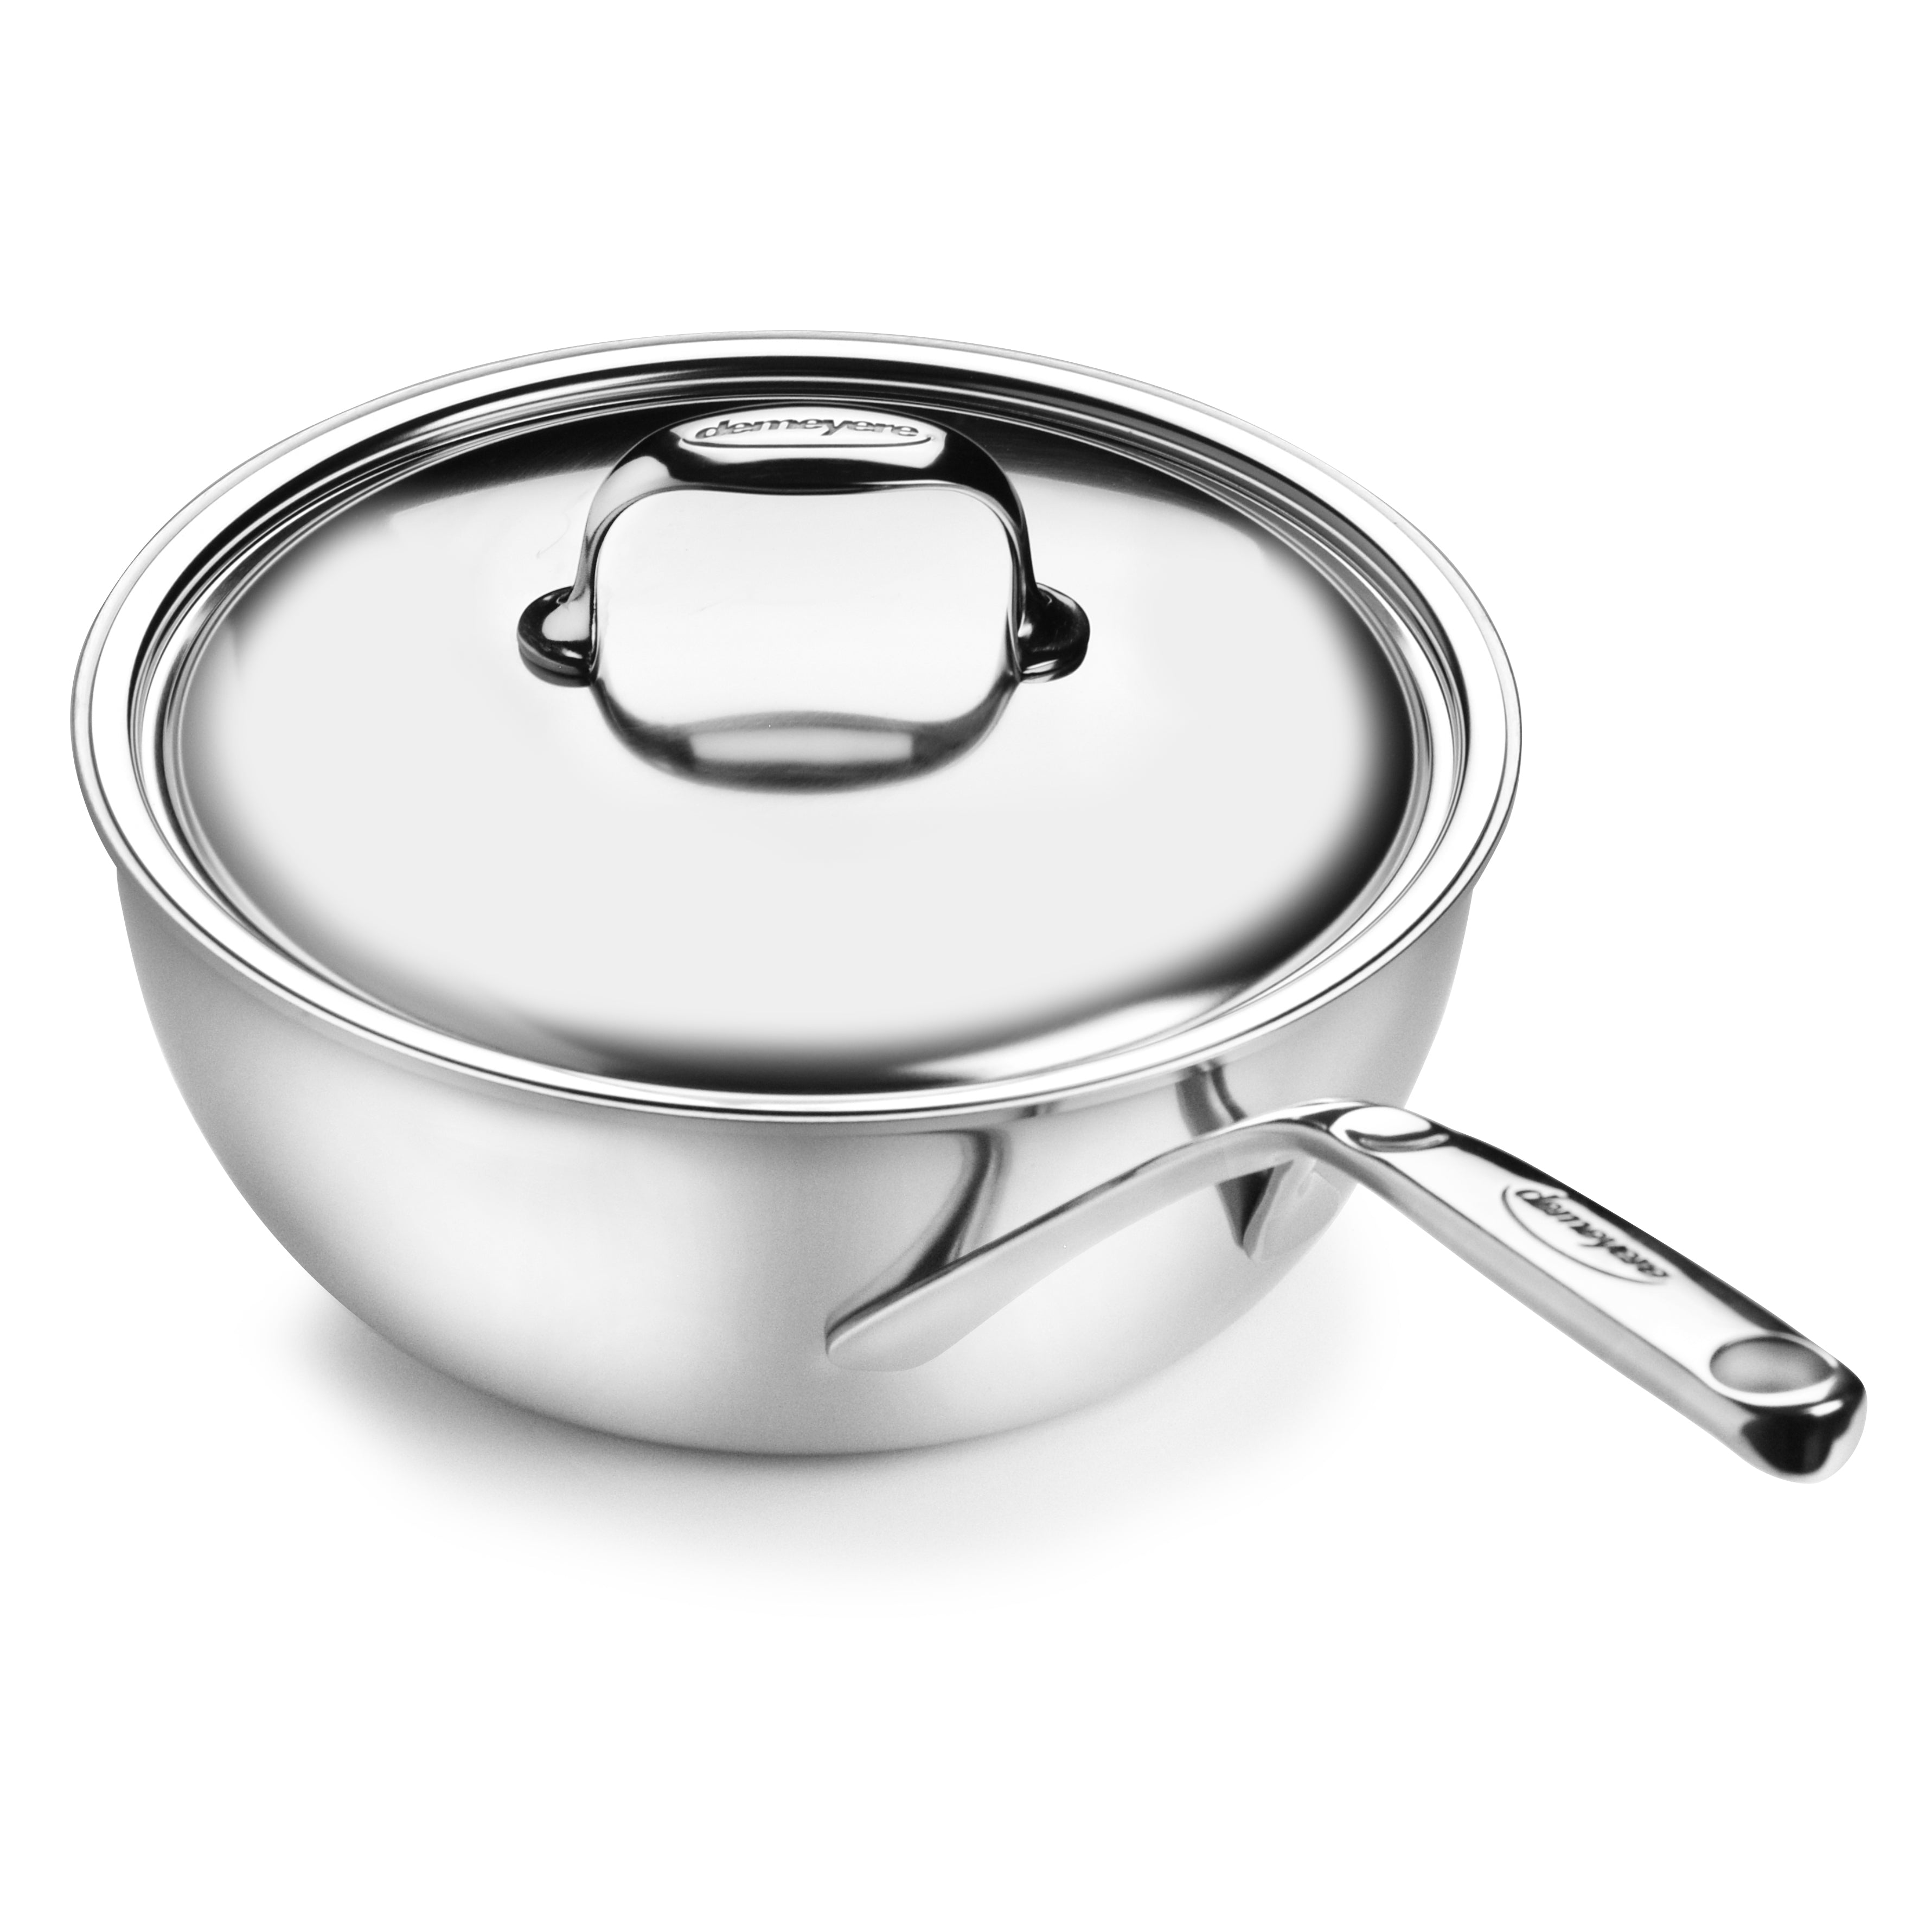 Demeyere Atlantis Proline 12.6 Stainless Fry Pan with Handle